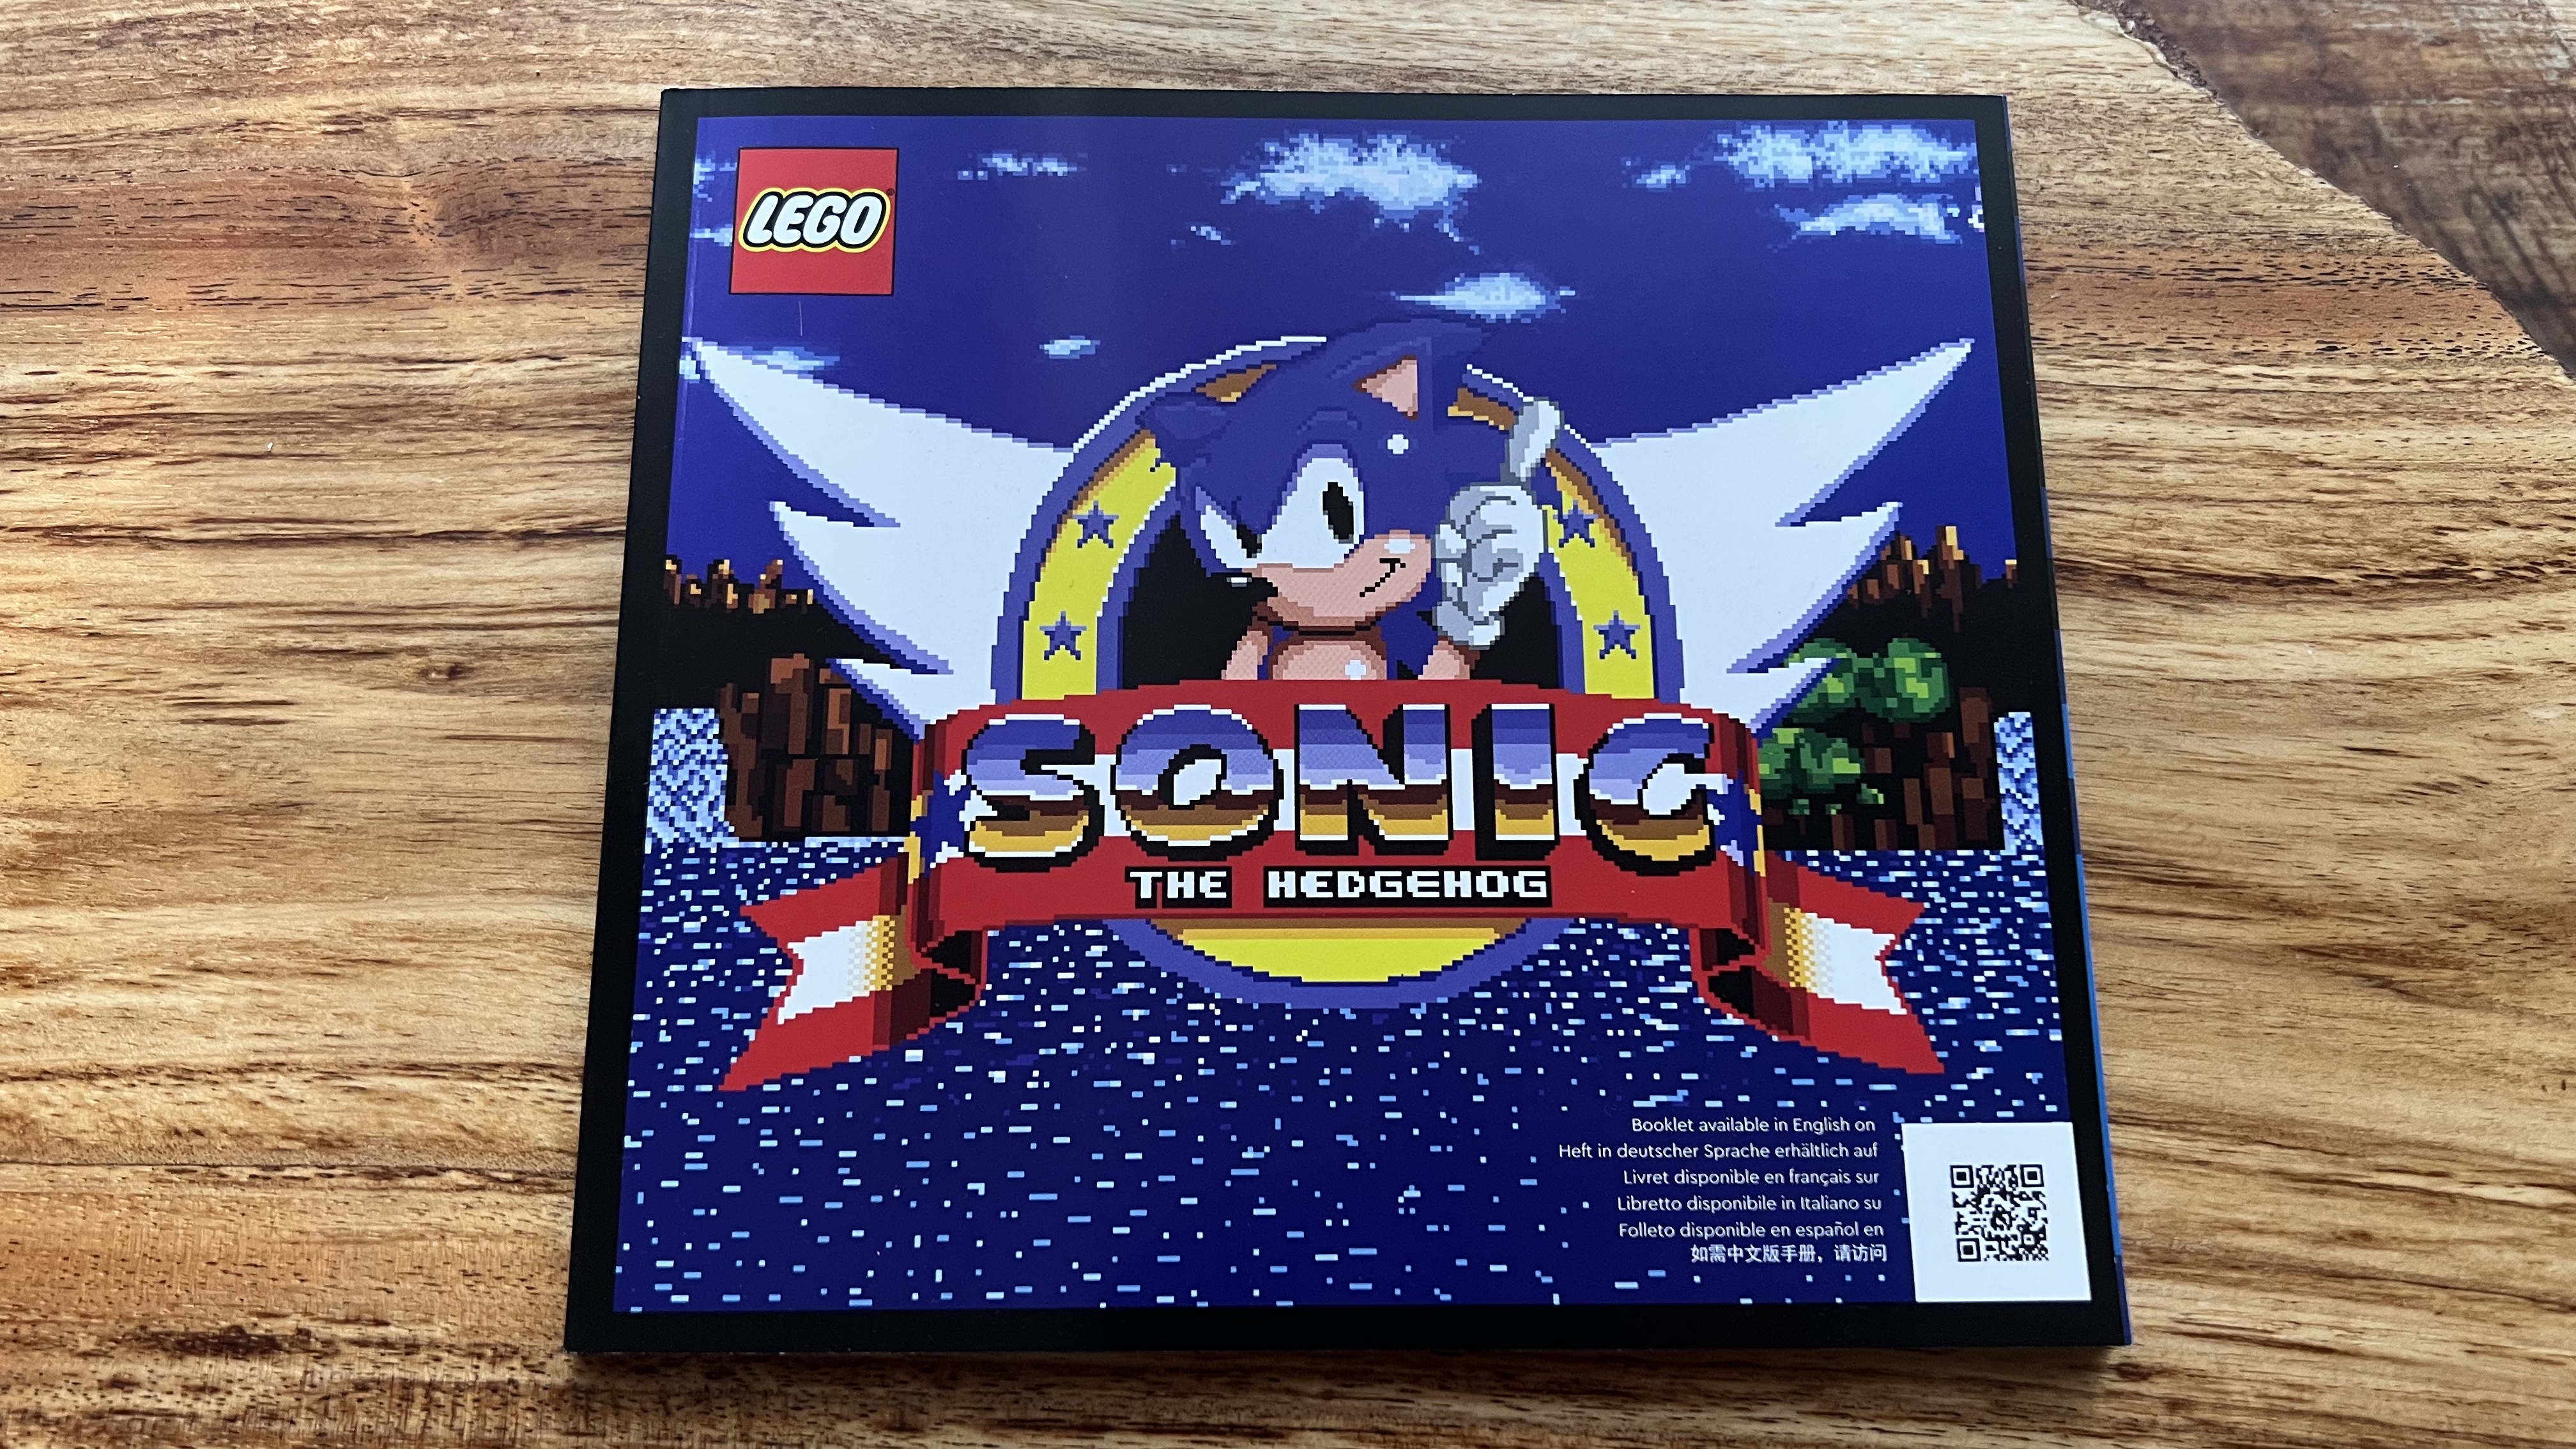 Another new Sonic Lego set features the iconic Death Egg robot